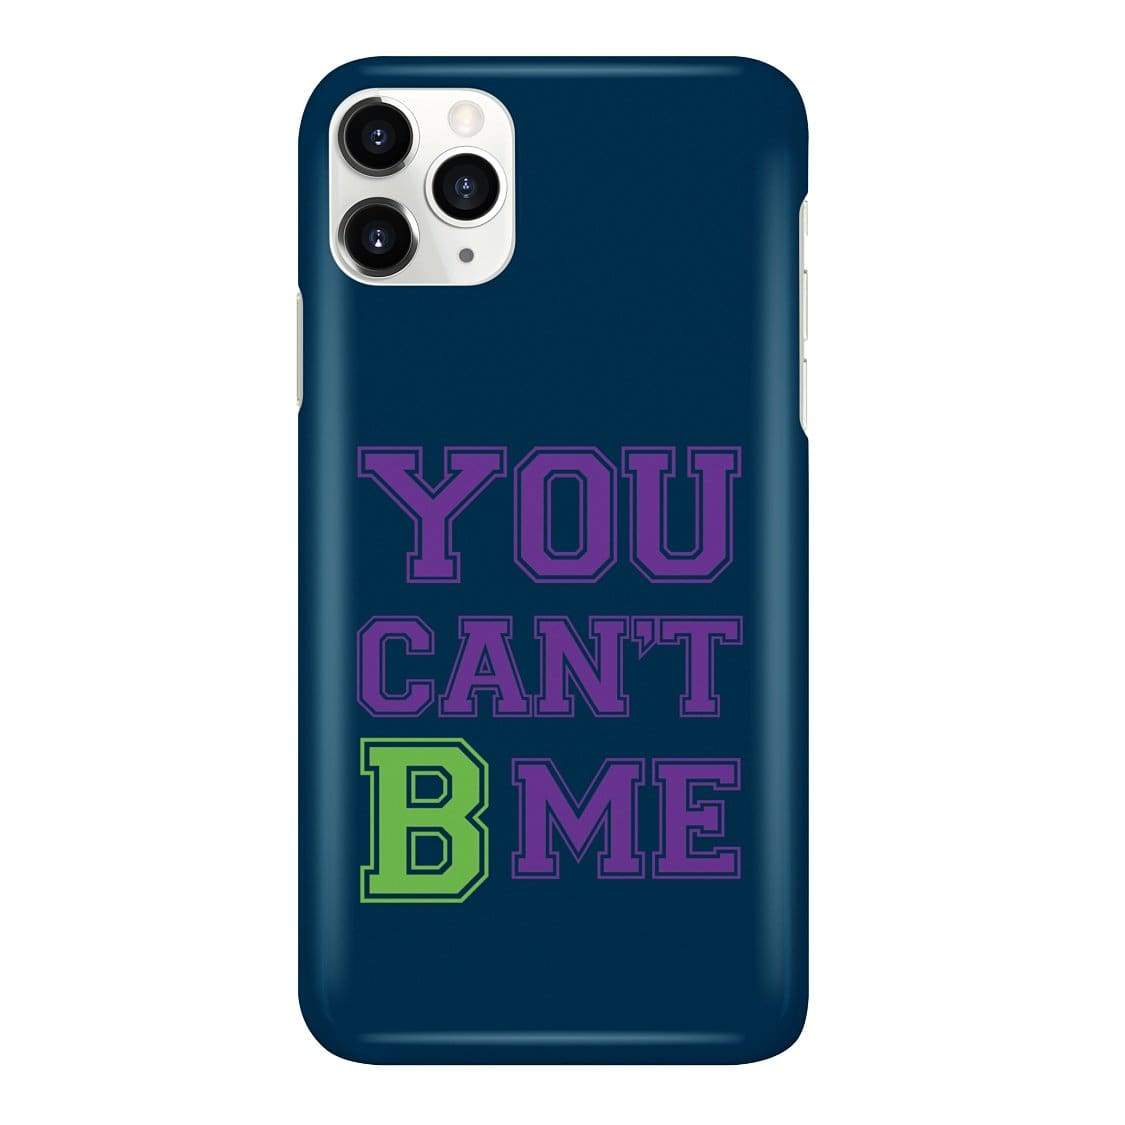 All Nerds Here You Can’t B Me Phone Case - Snap * iPhone * Samsung * - iPhone 11 Pro Max Case / Gloss / Apparel